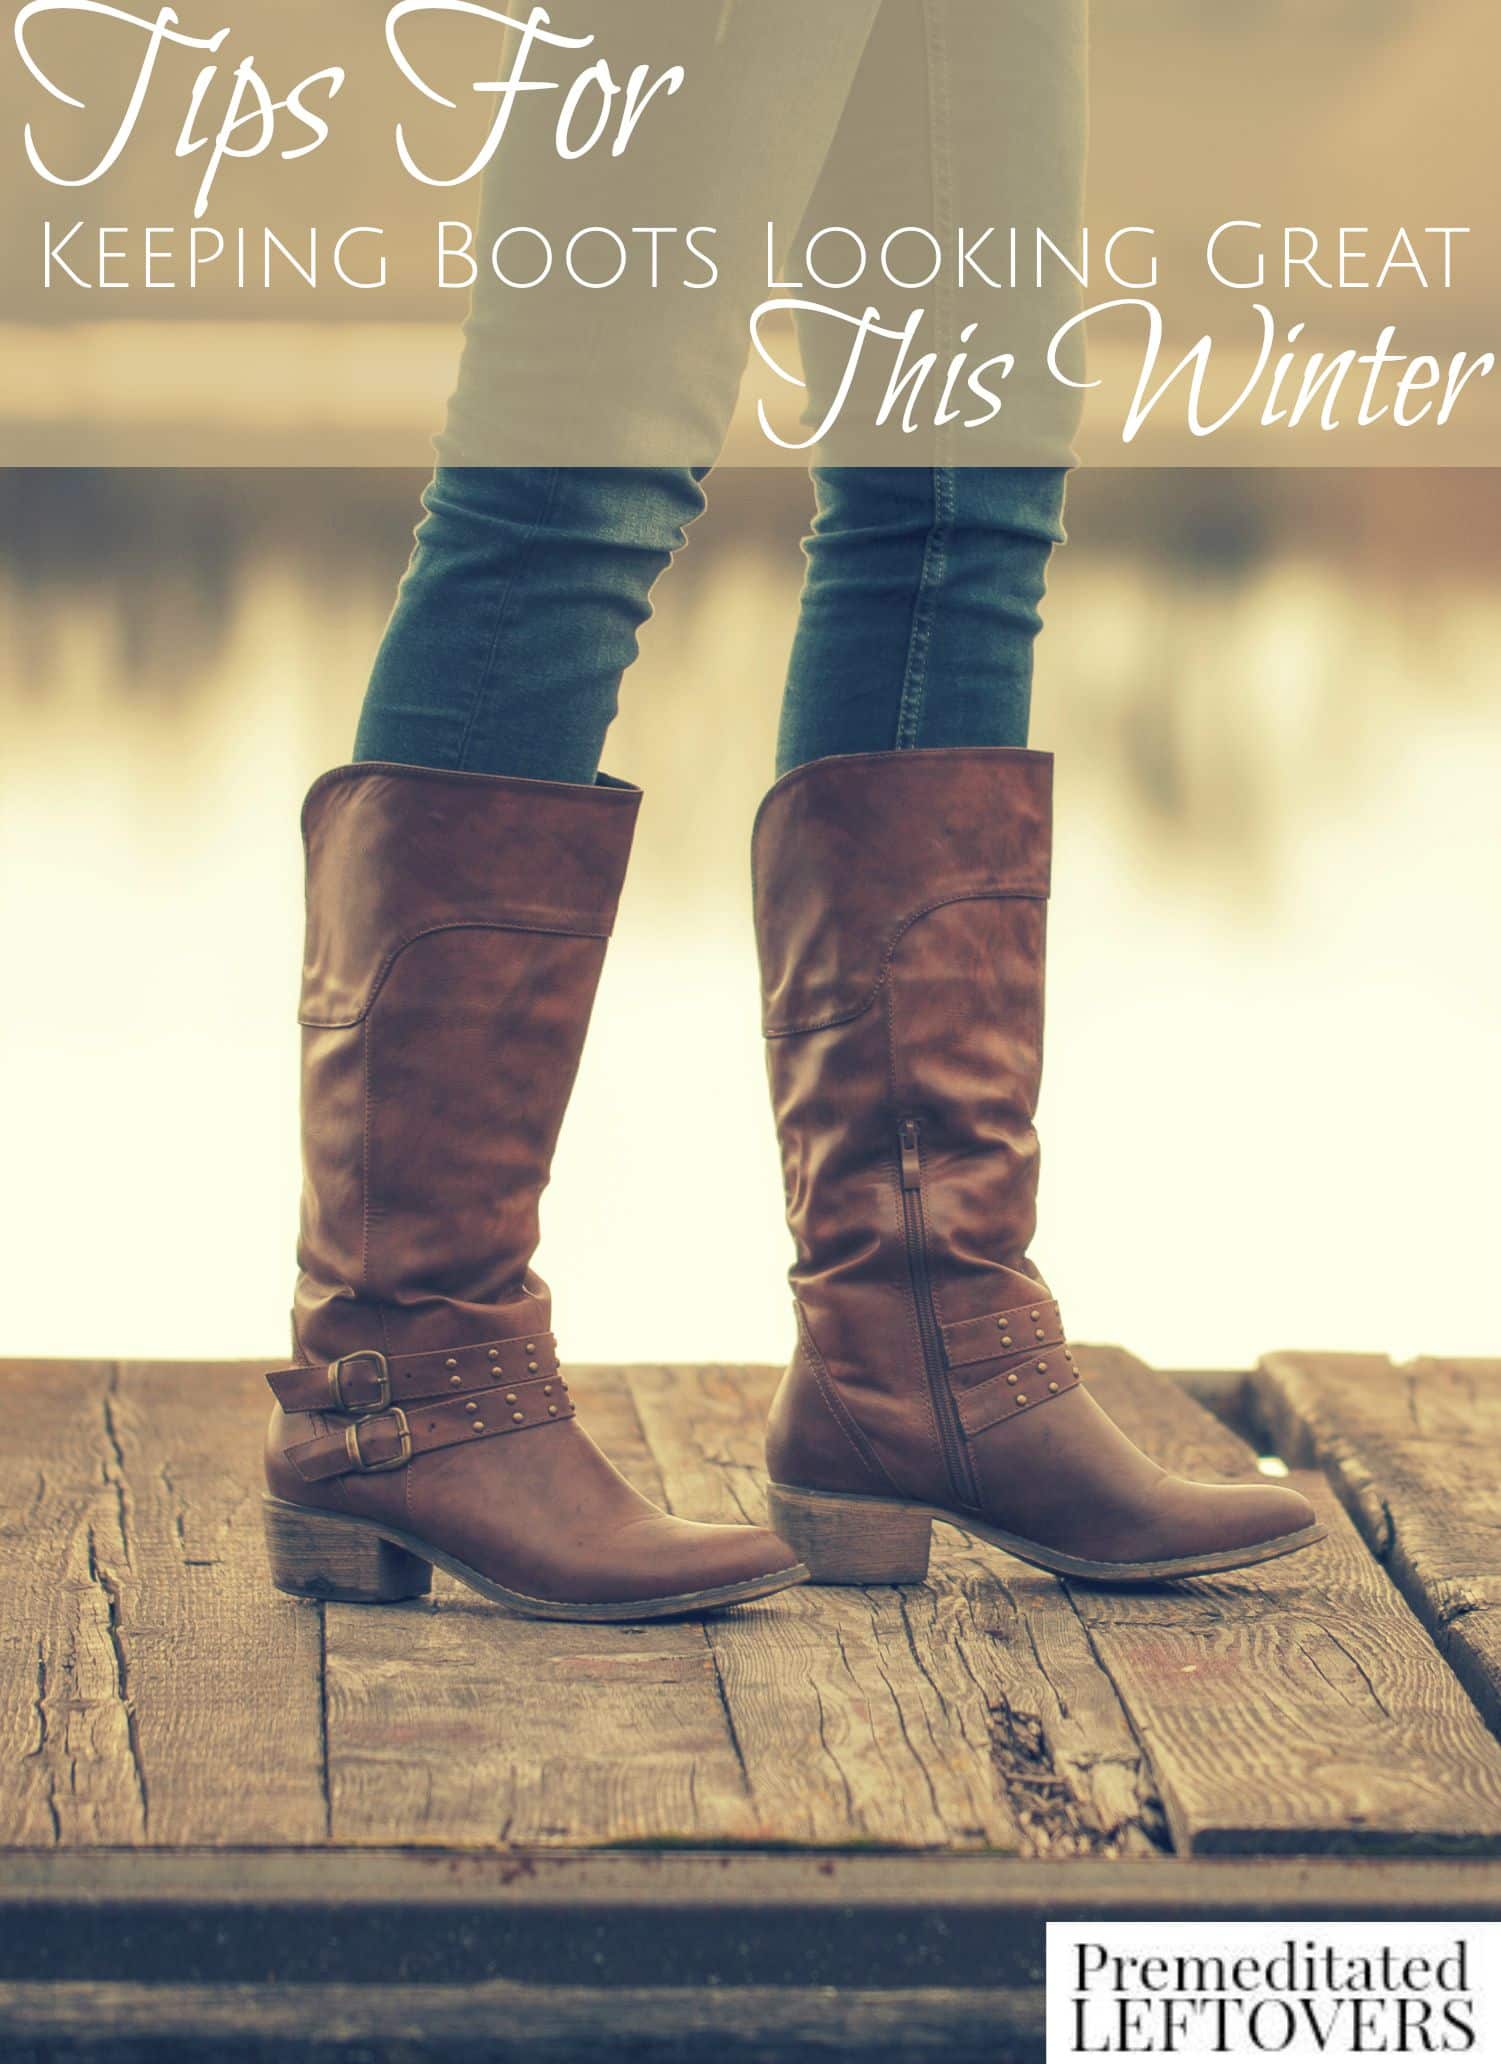 Tips For Keeping Boots Looking Great This Winter - Using these tips you can keep your boots looking great for several years.